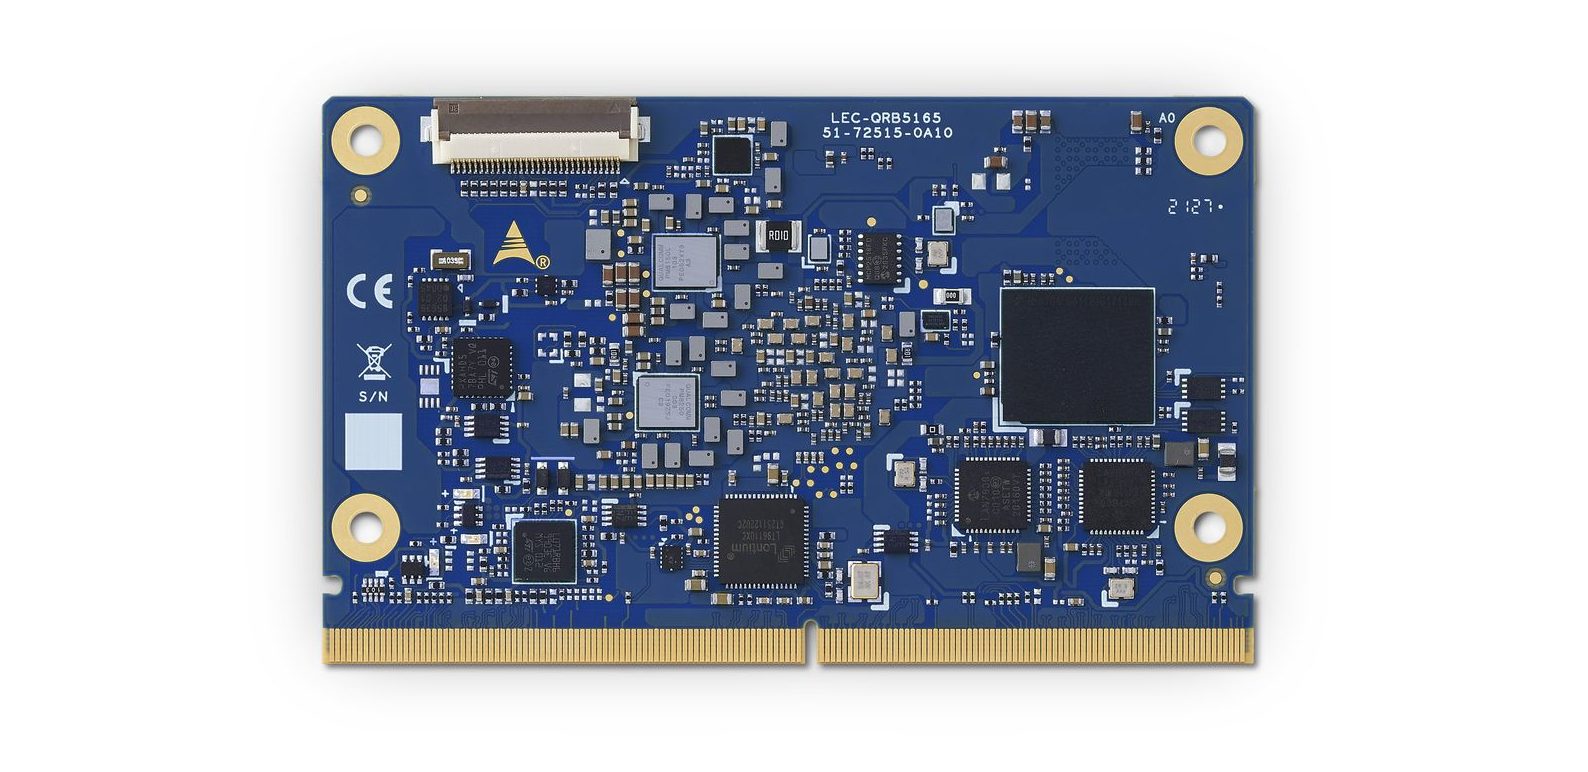 ADLINK releases its first SMARC module based on Qualcomm QRB5165